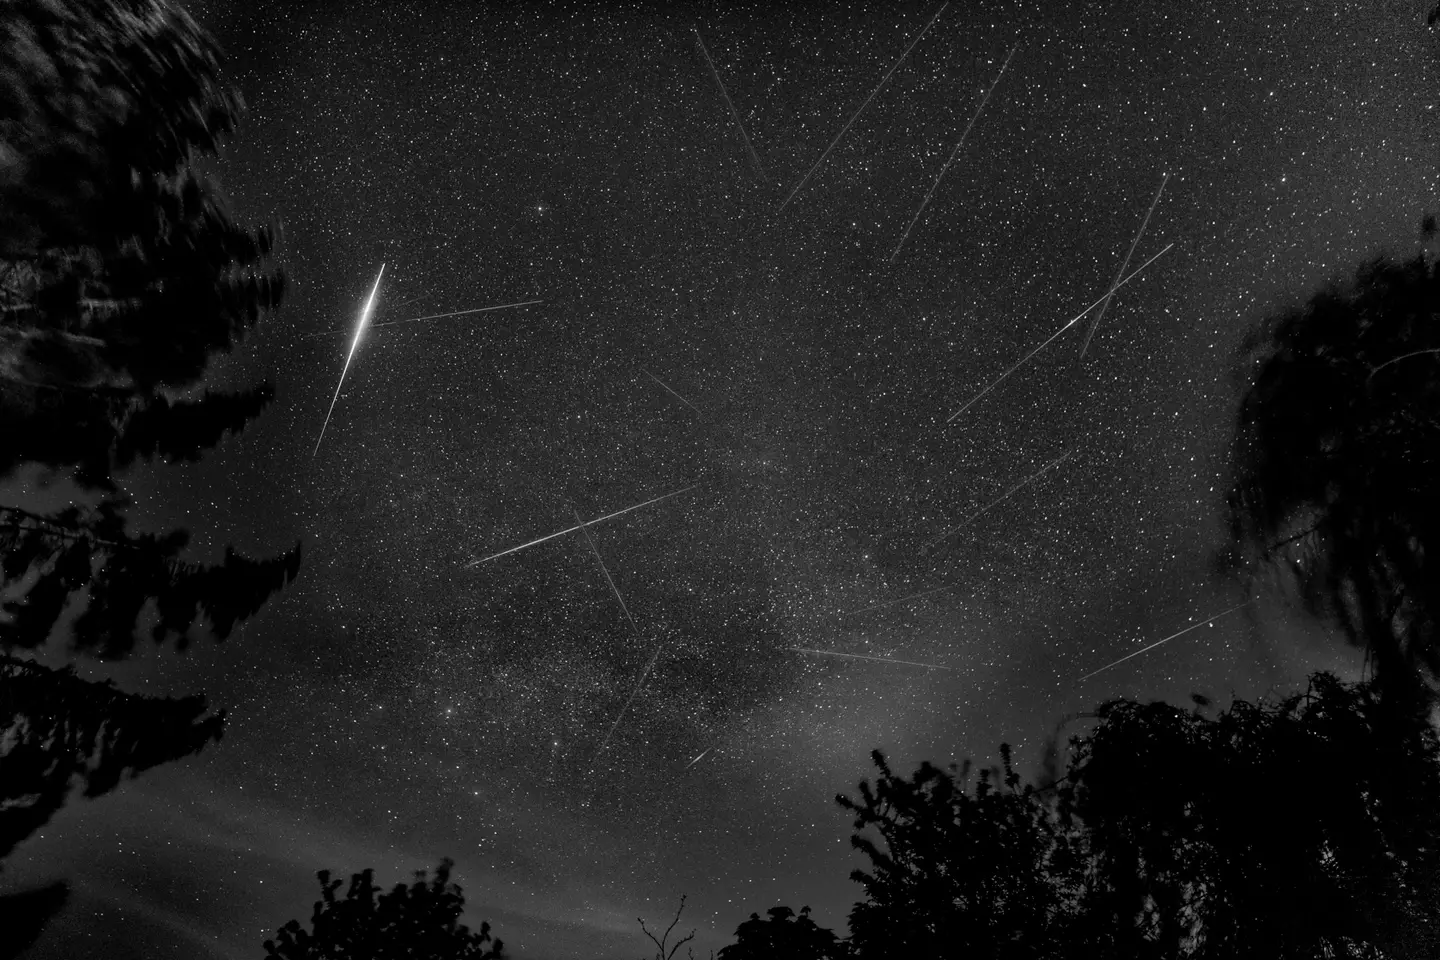 UK to see biggest meteor shower of the year tonight